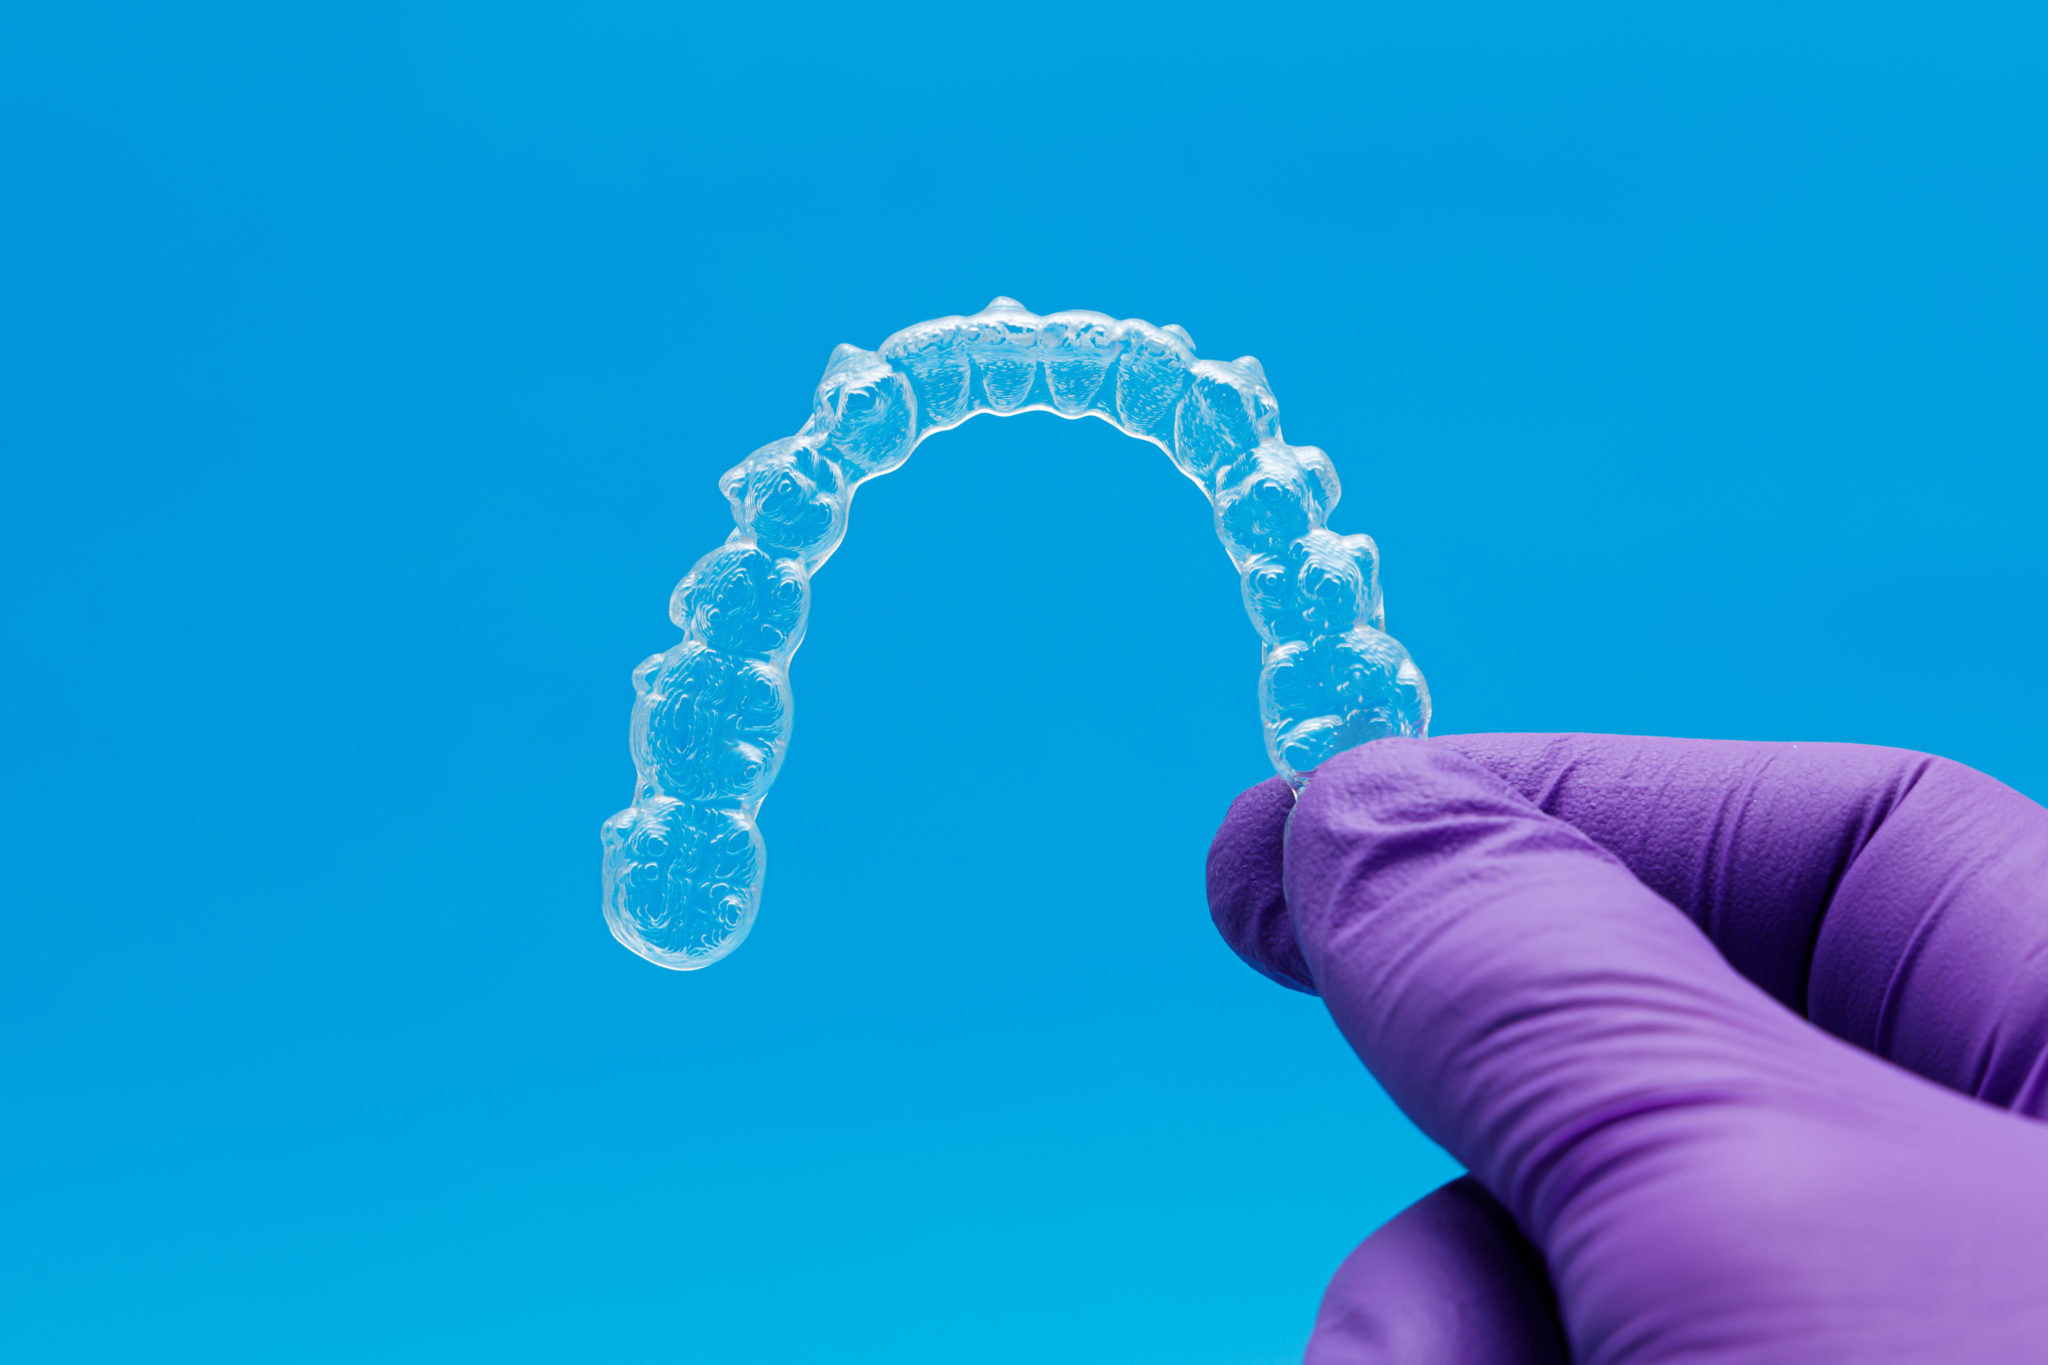 Invisalign vs Braces: Which is Better for Your Teeth?